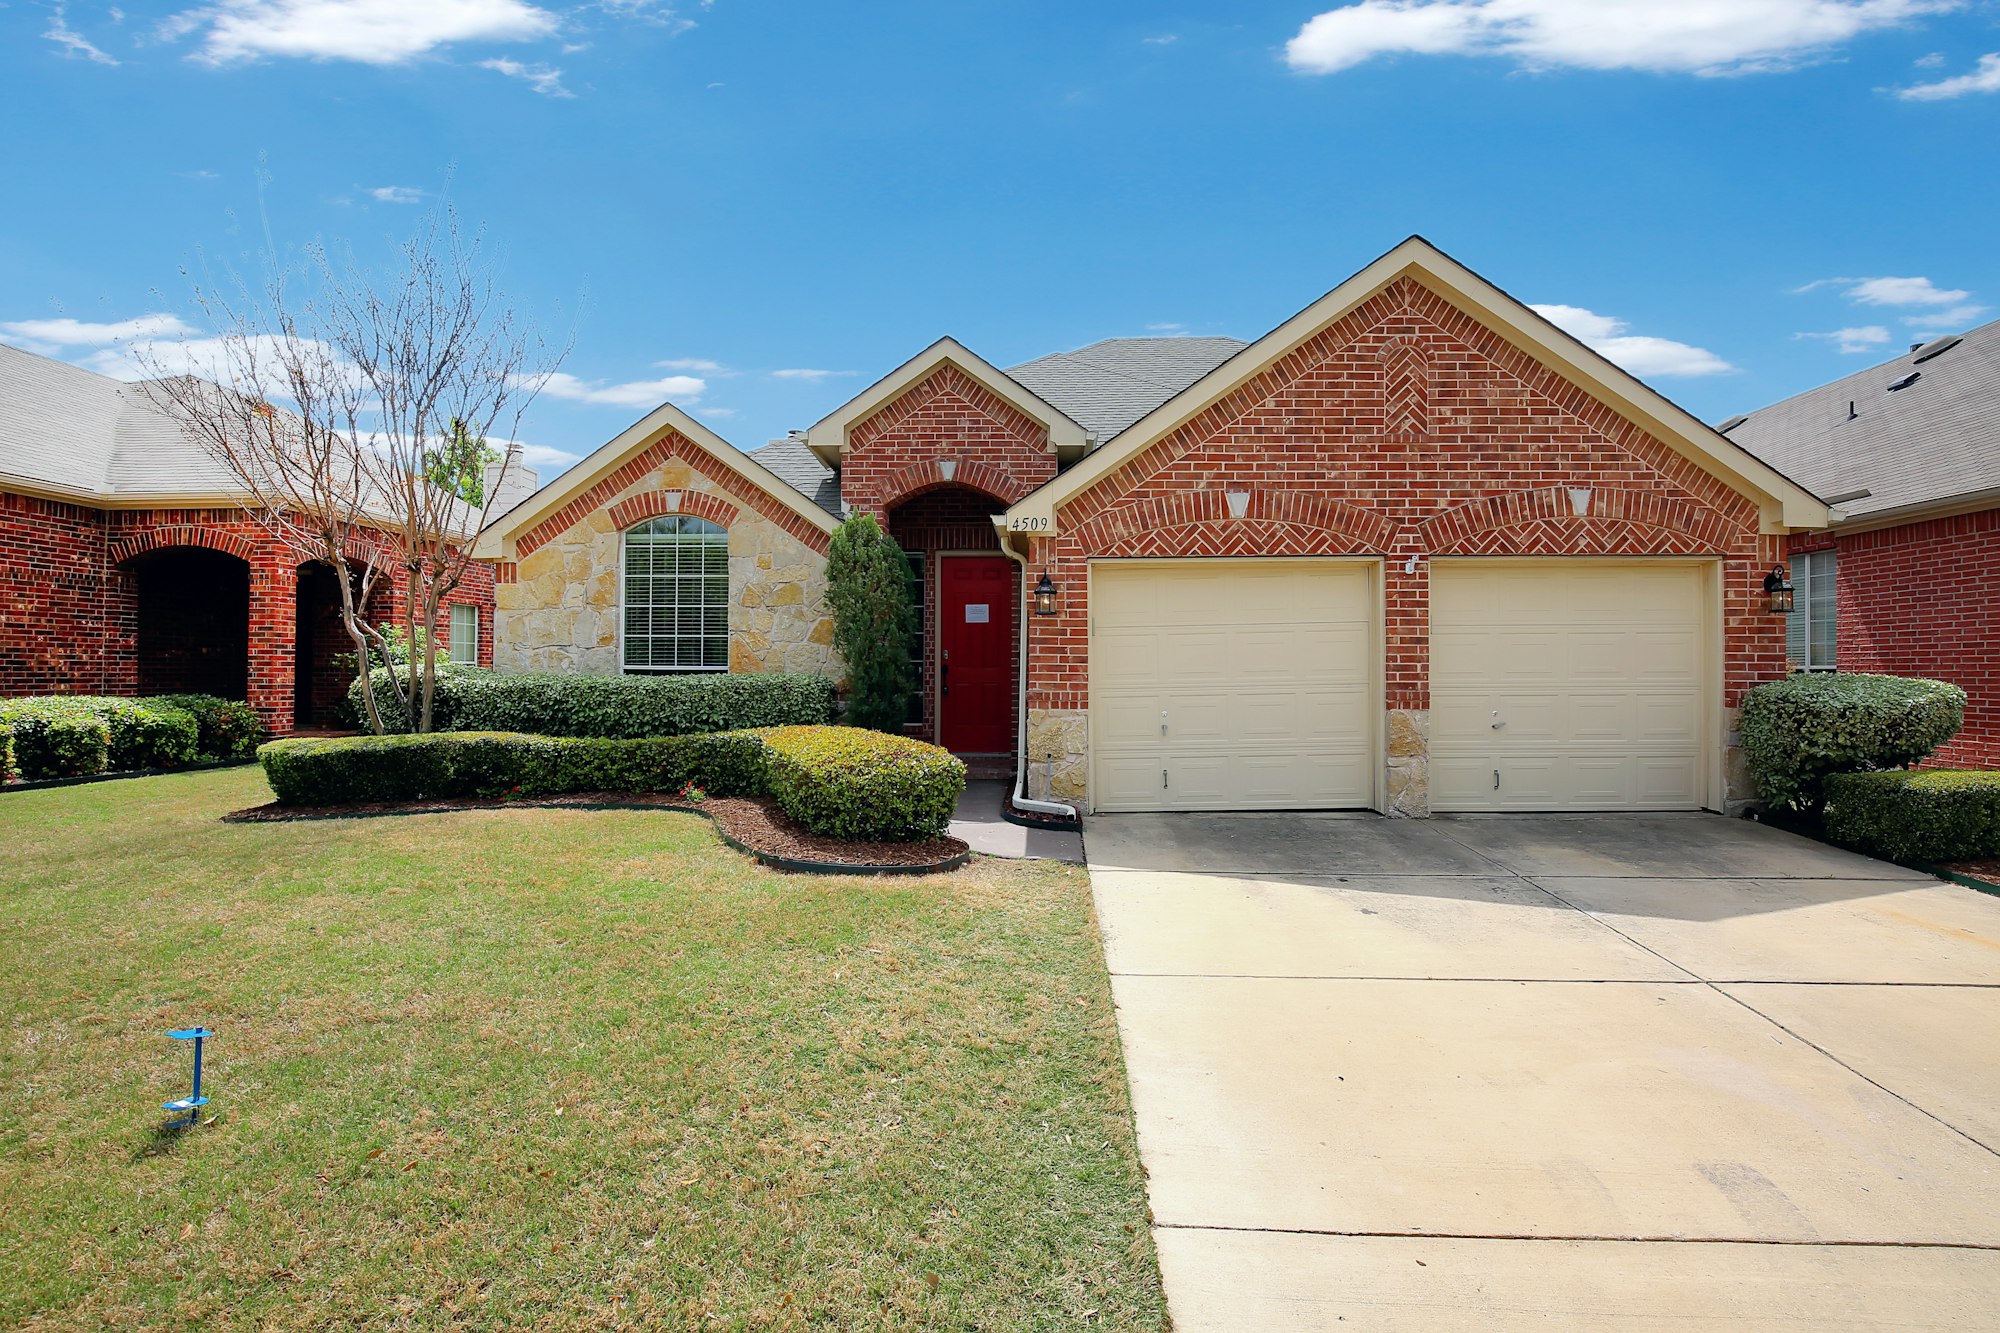 Photo 1 of 29 - 4509 Marguerite Ln, Fort Worth, TX 76123